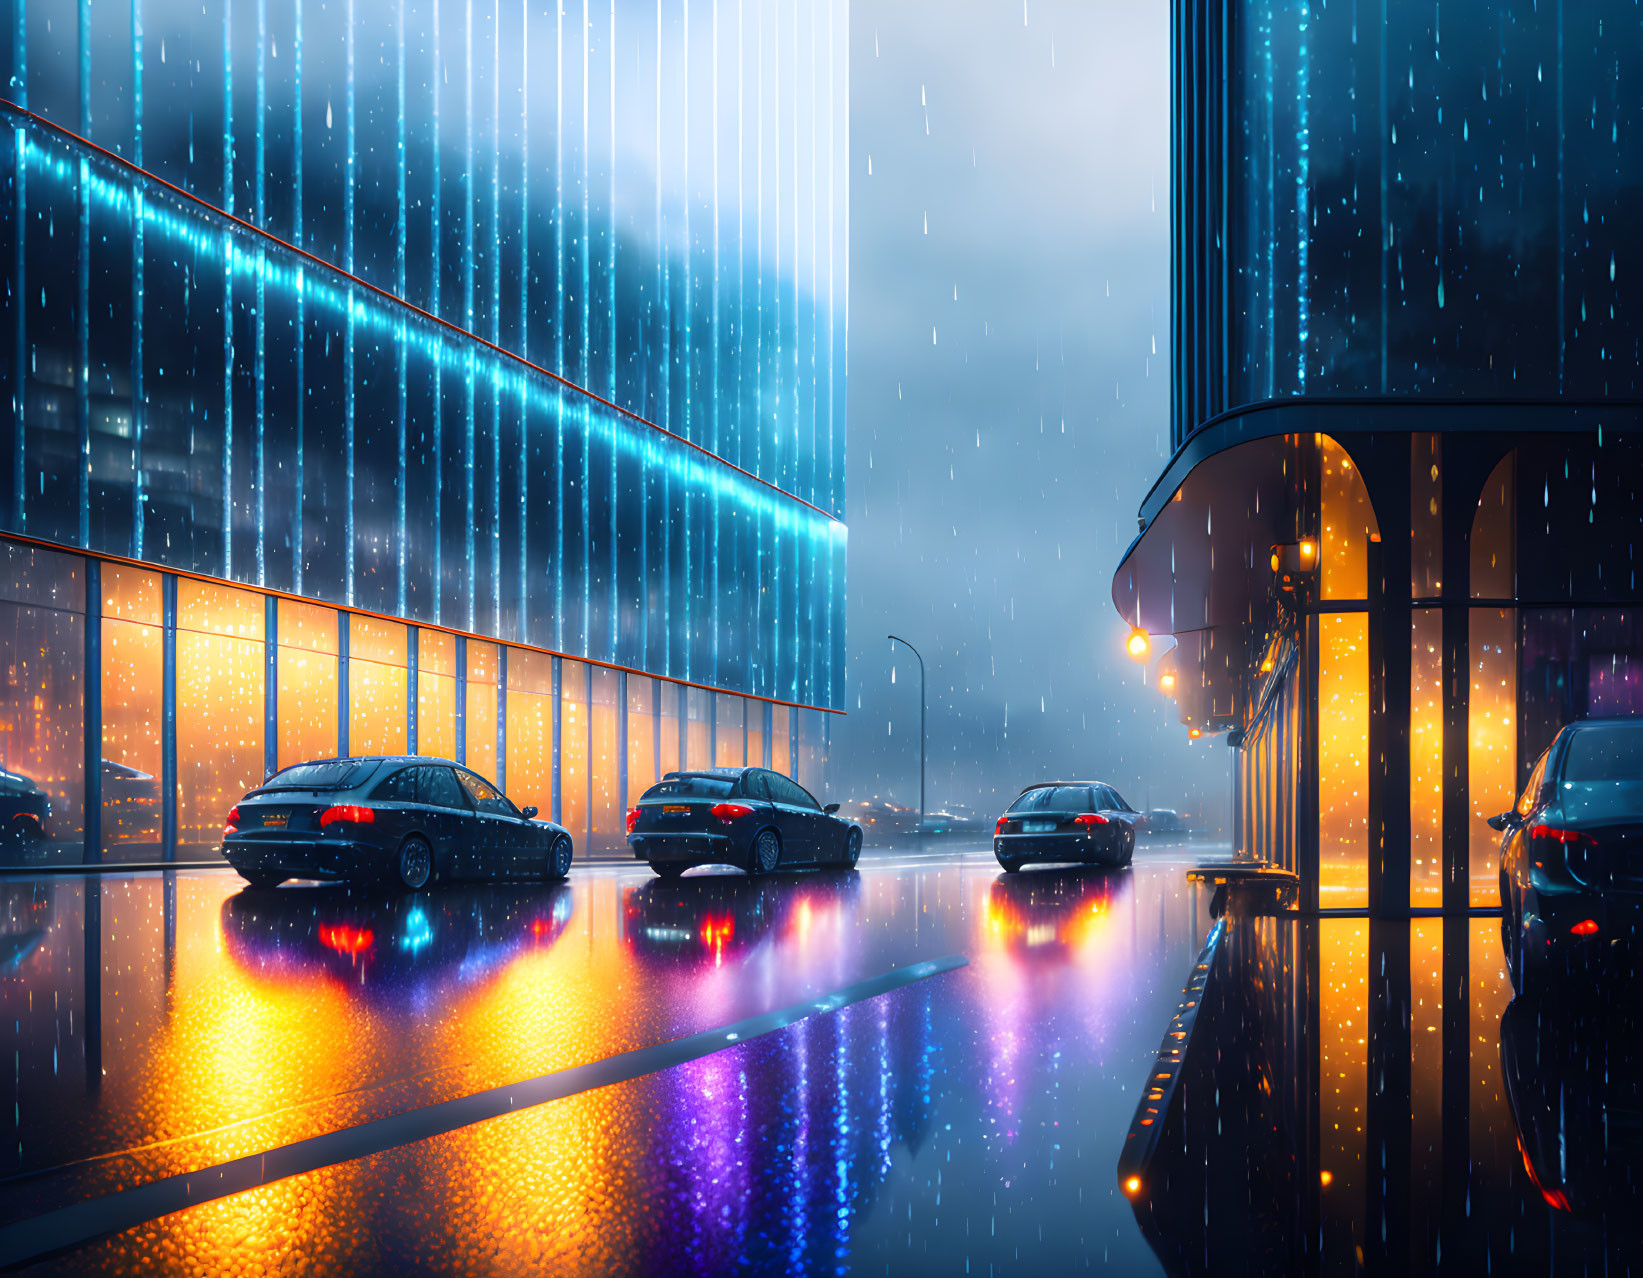 City street at night: cars on wet road with neon reflections